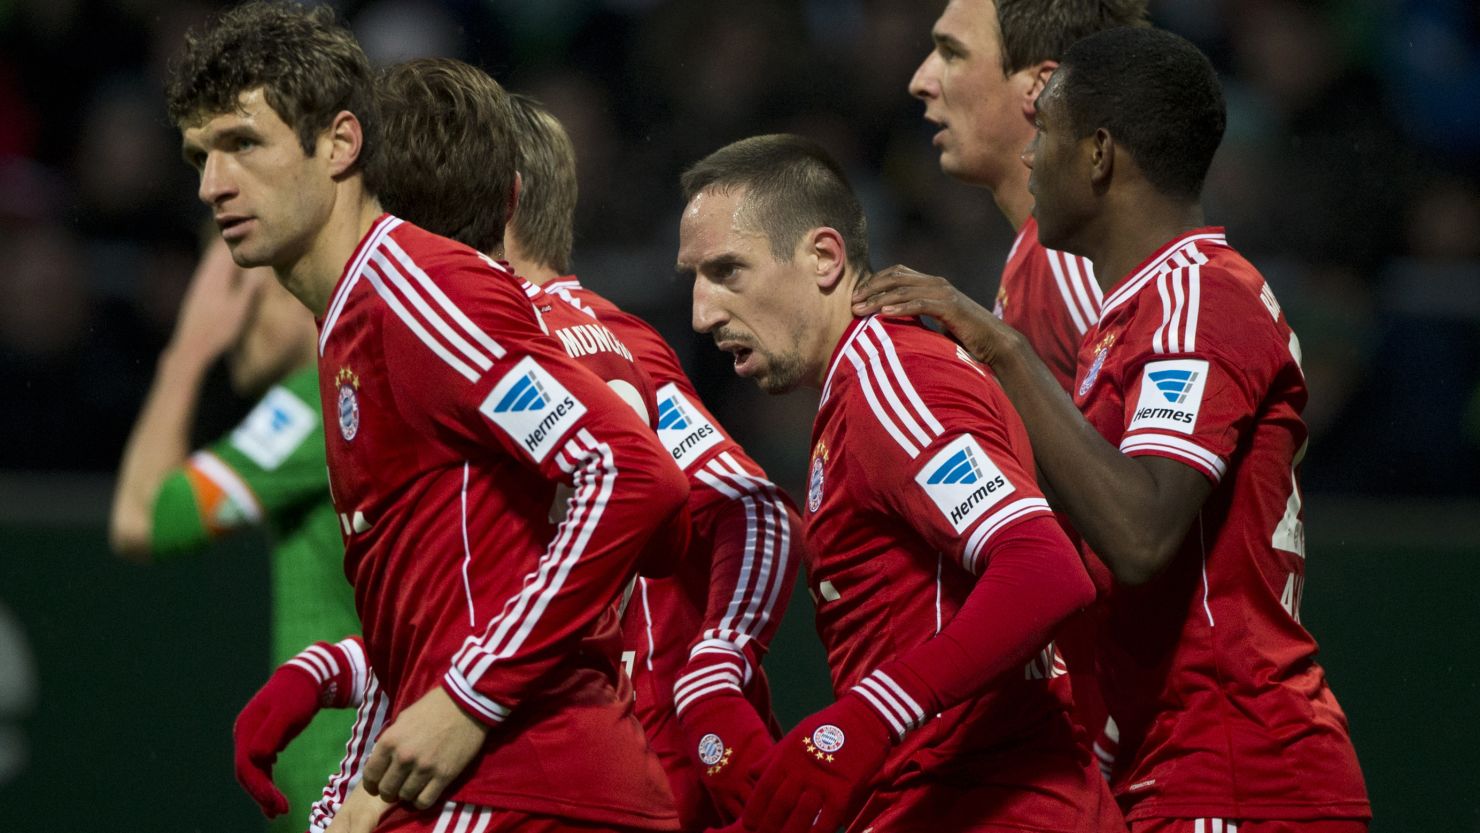 Franck Ribery takes center stage in Bayern Munich's 7-0 rout of Werder Bremen in the Bundesliga.